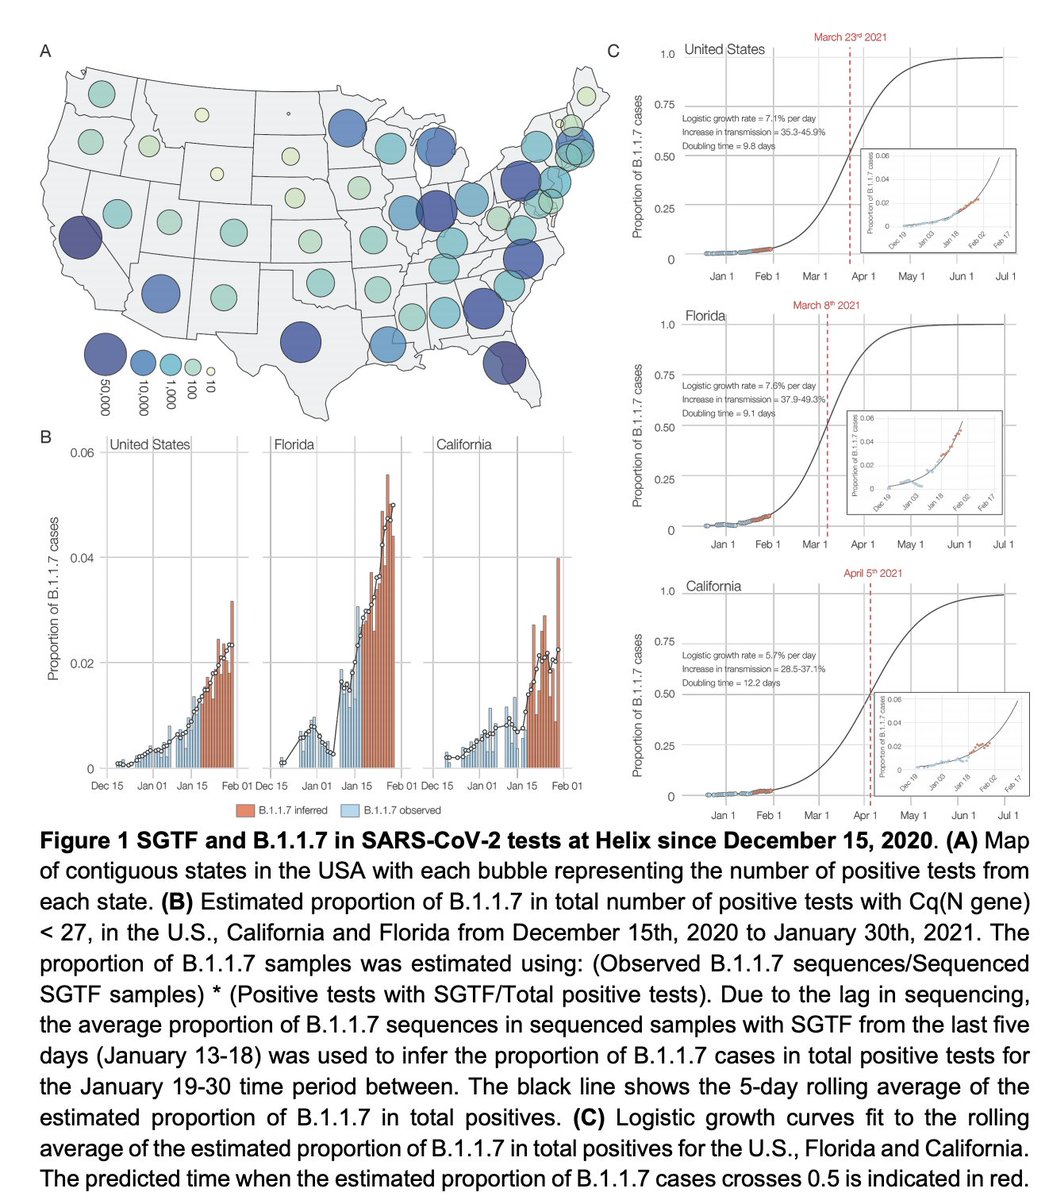 The latest preprint analysis of the B117 variant has this variant becoming dominant in the US in March. That's similar to my forecasts, though I don't think this analysis has taken into account the competitive factors from P1 & B1351 variants.